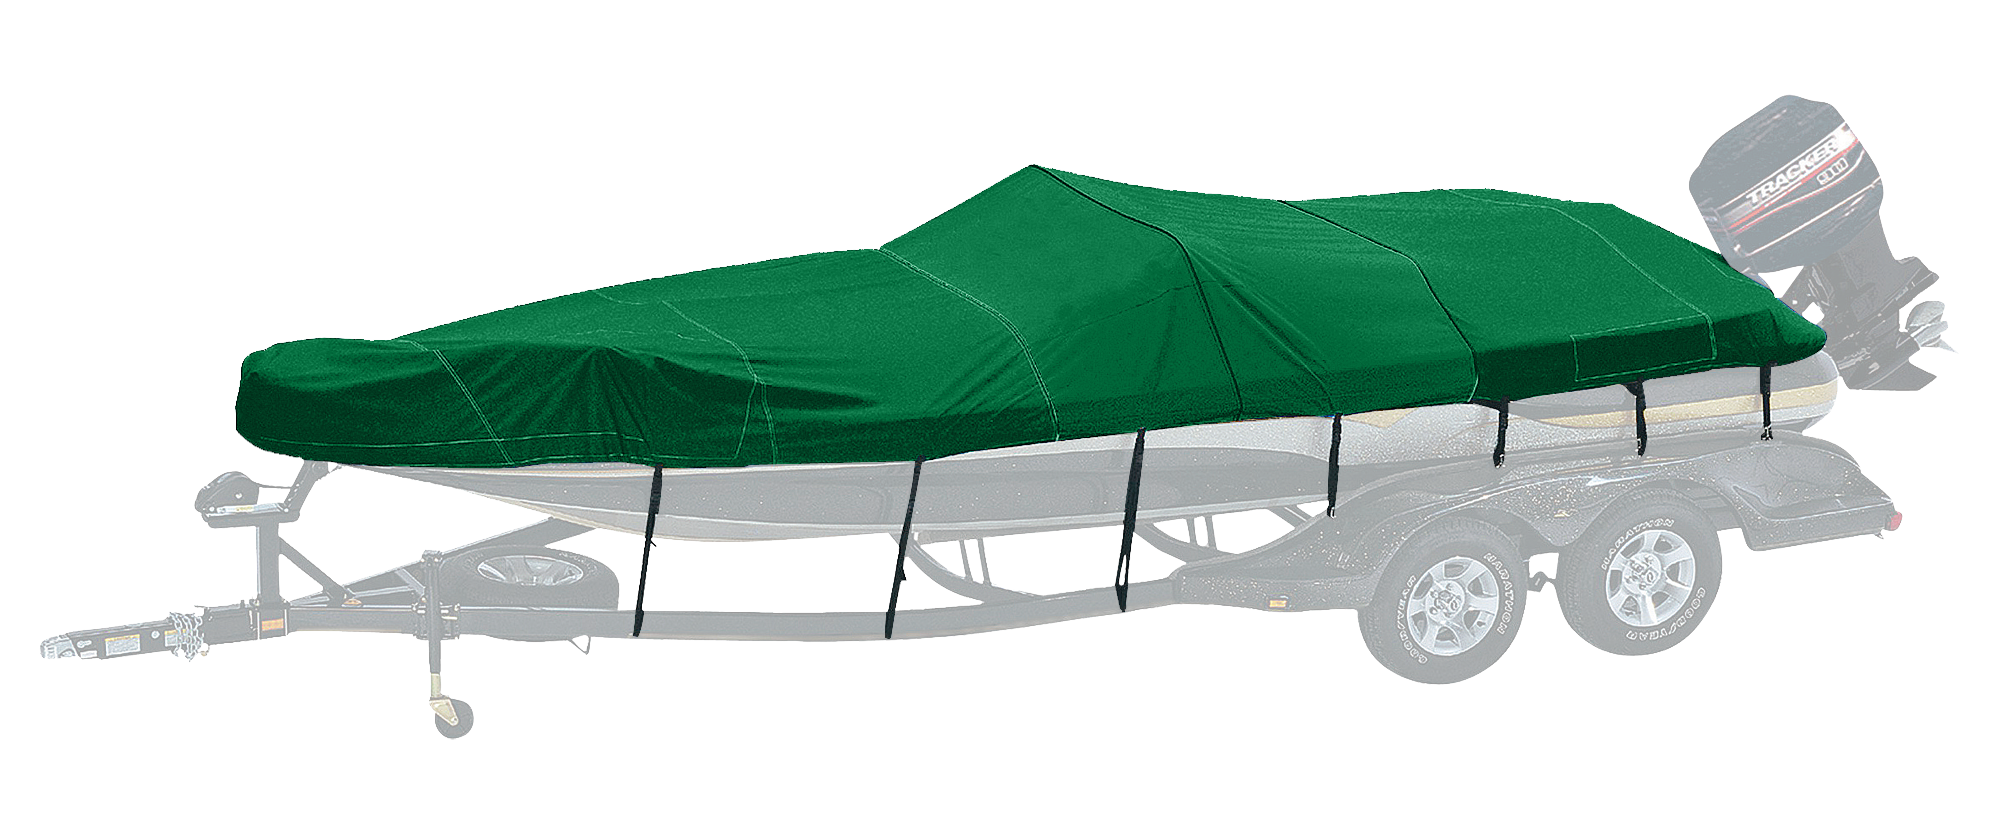 Bass Pro Shops Westland Exact Fit Boat Cover by Westland - Tahoe Boats - 2000-2002 220 Deckboat I/O - Forest Green